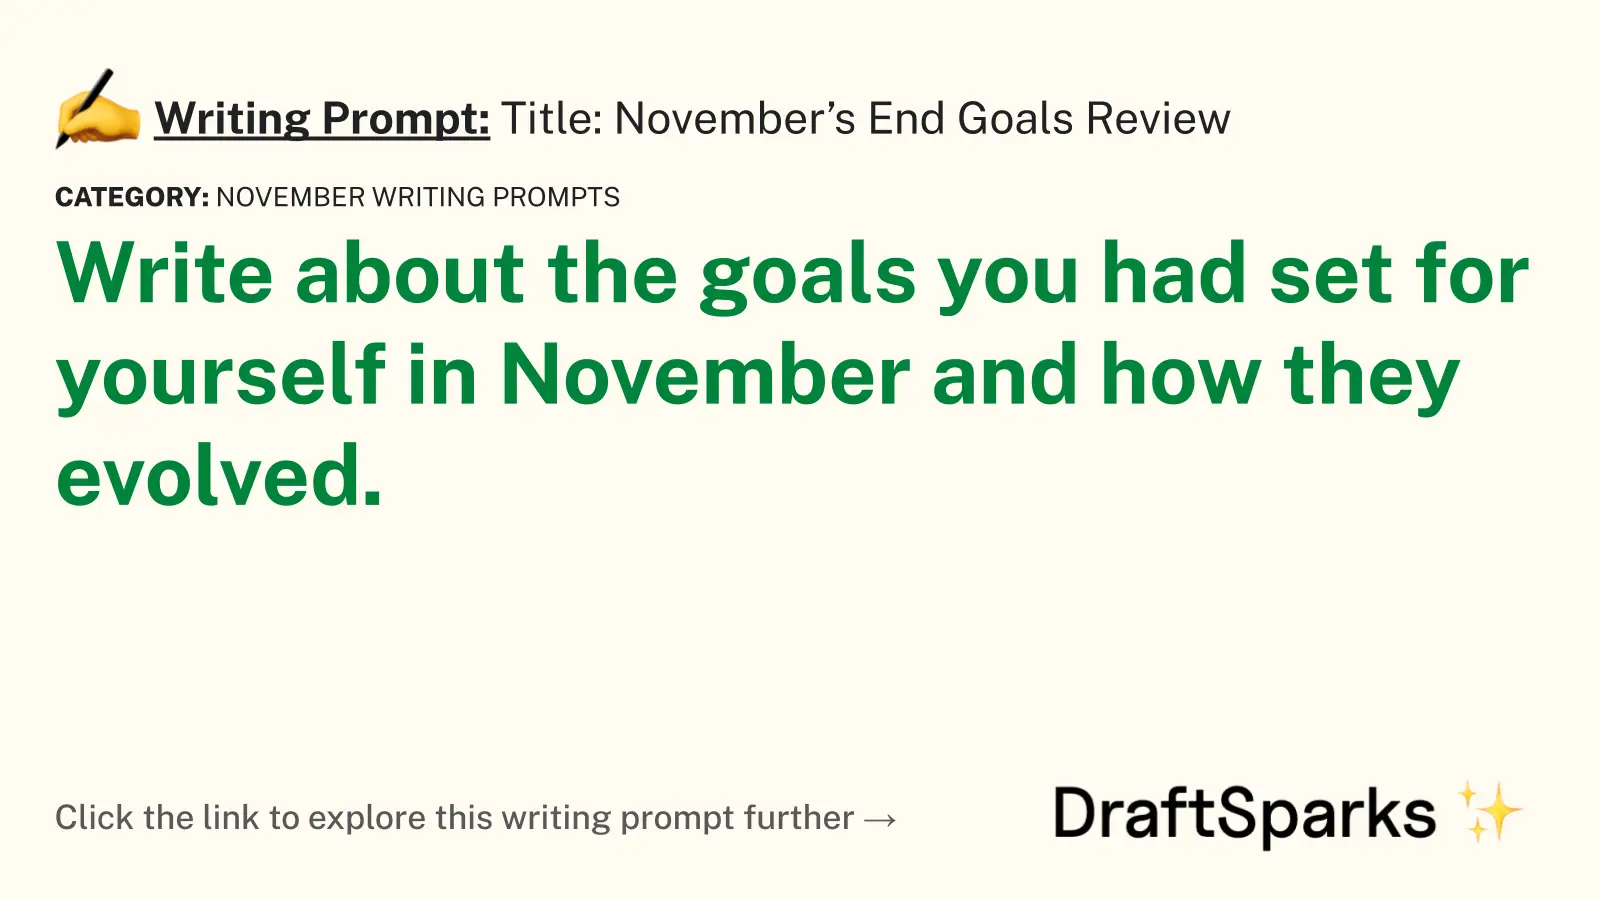 Title: November’s End Goals Review